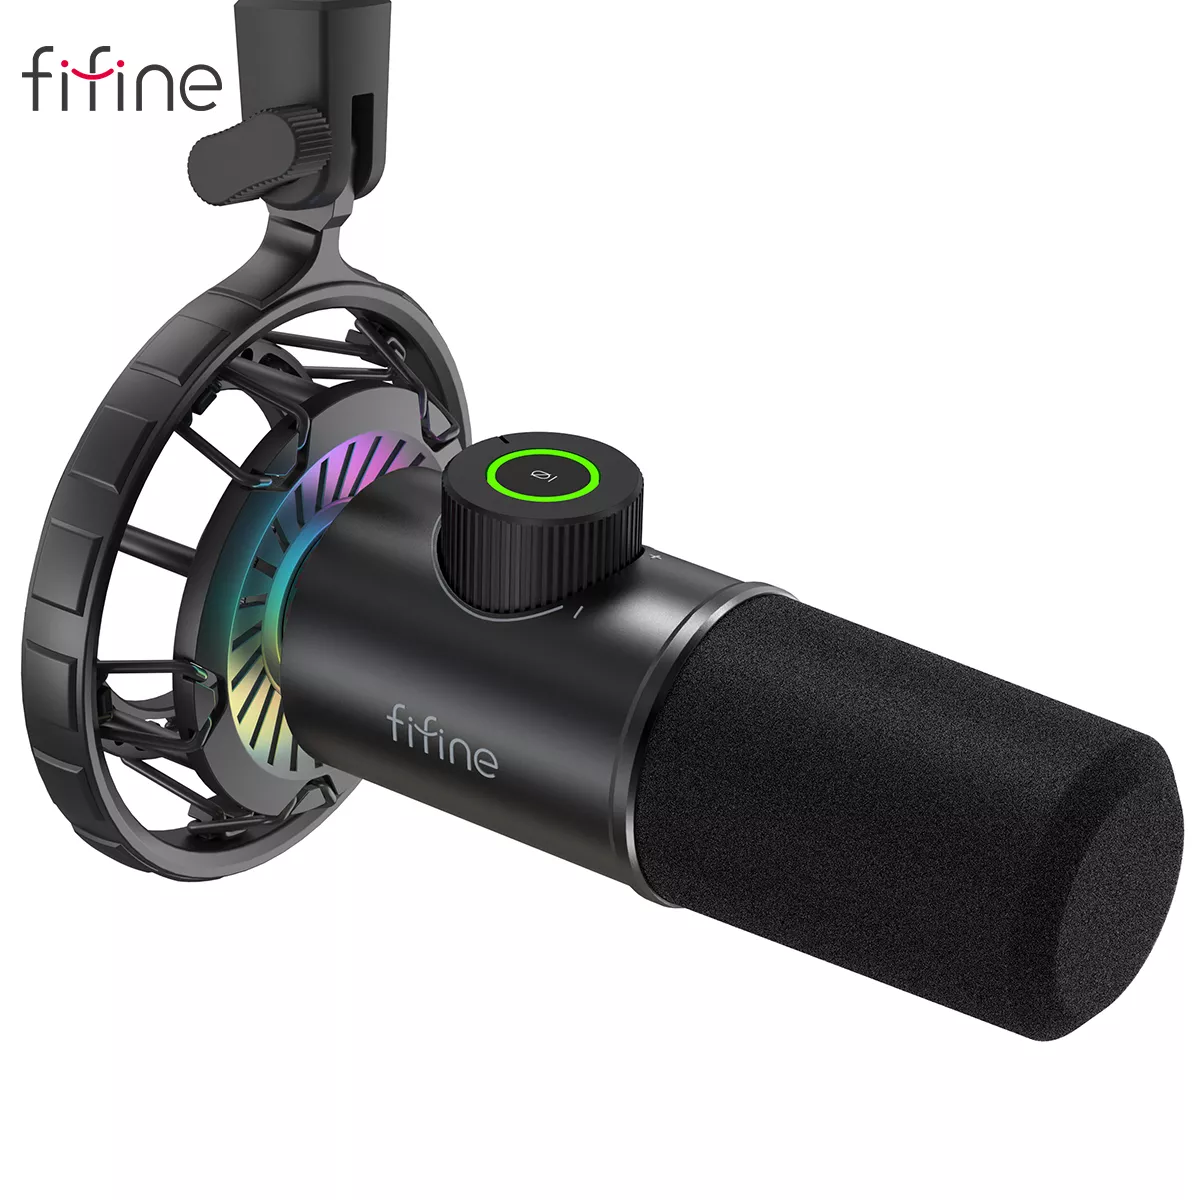 Fifine Dynamic Microphone For Windows&Laptop,Usb Mic For Gaming With Tap To Mute B